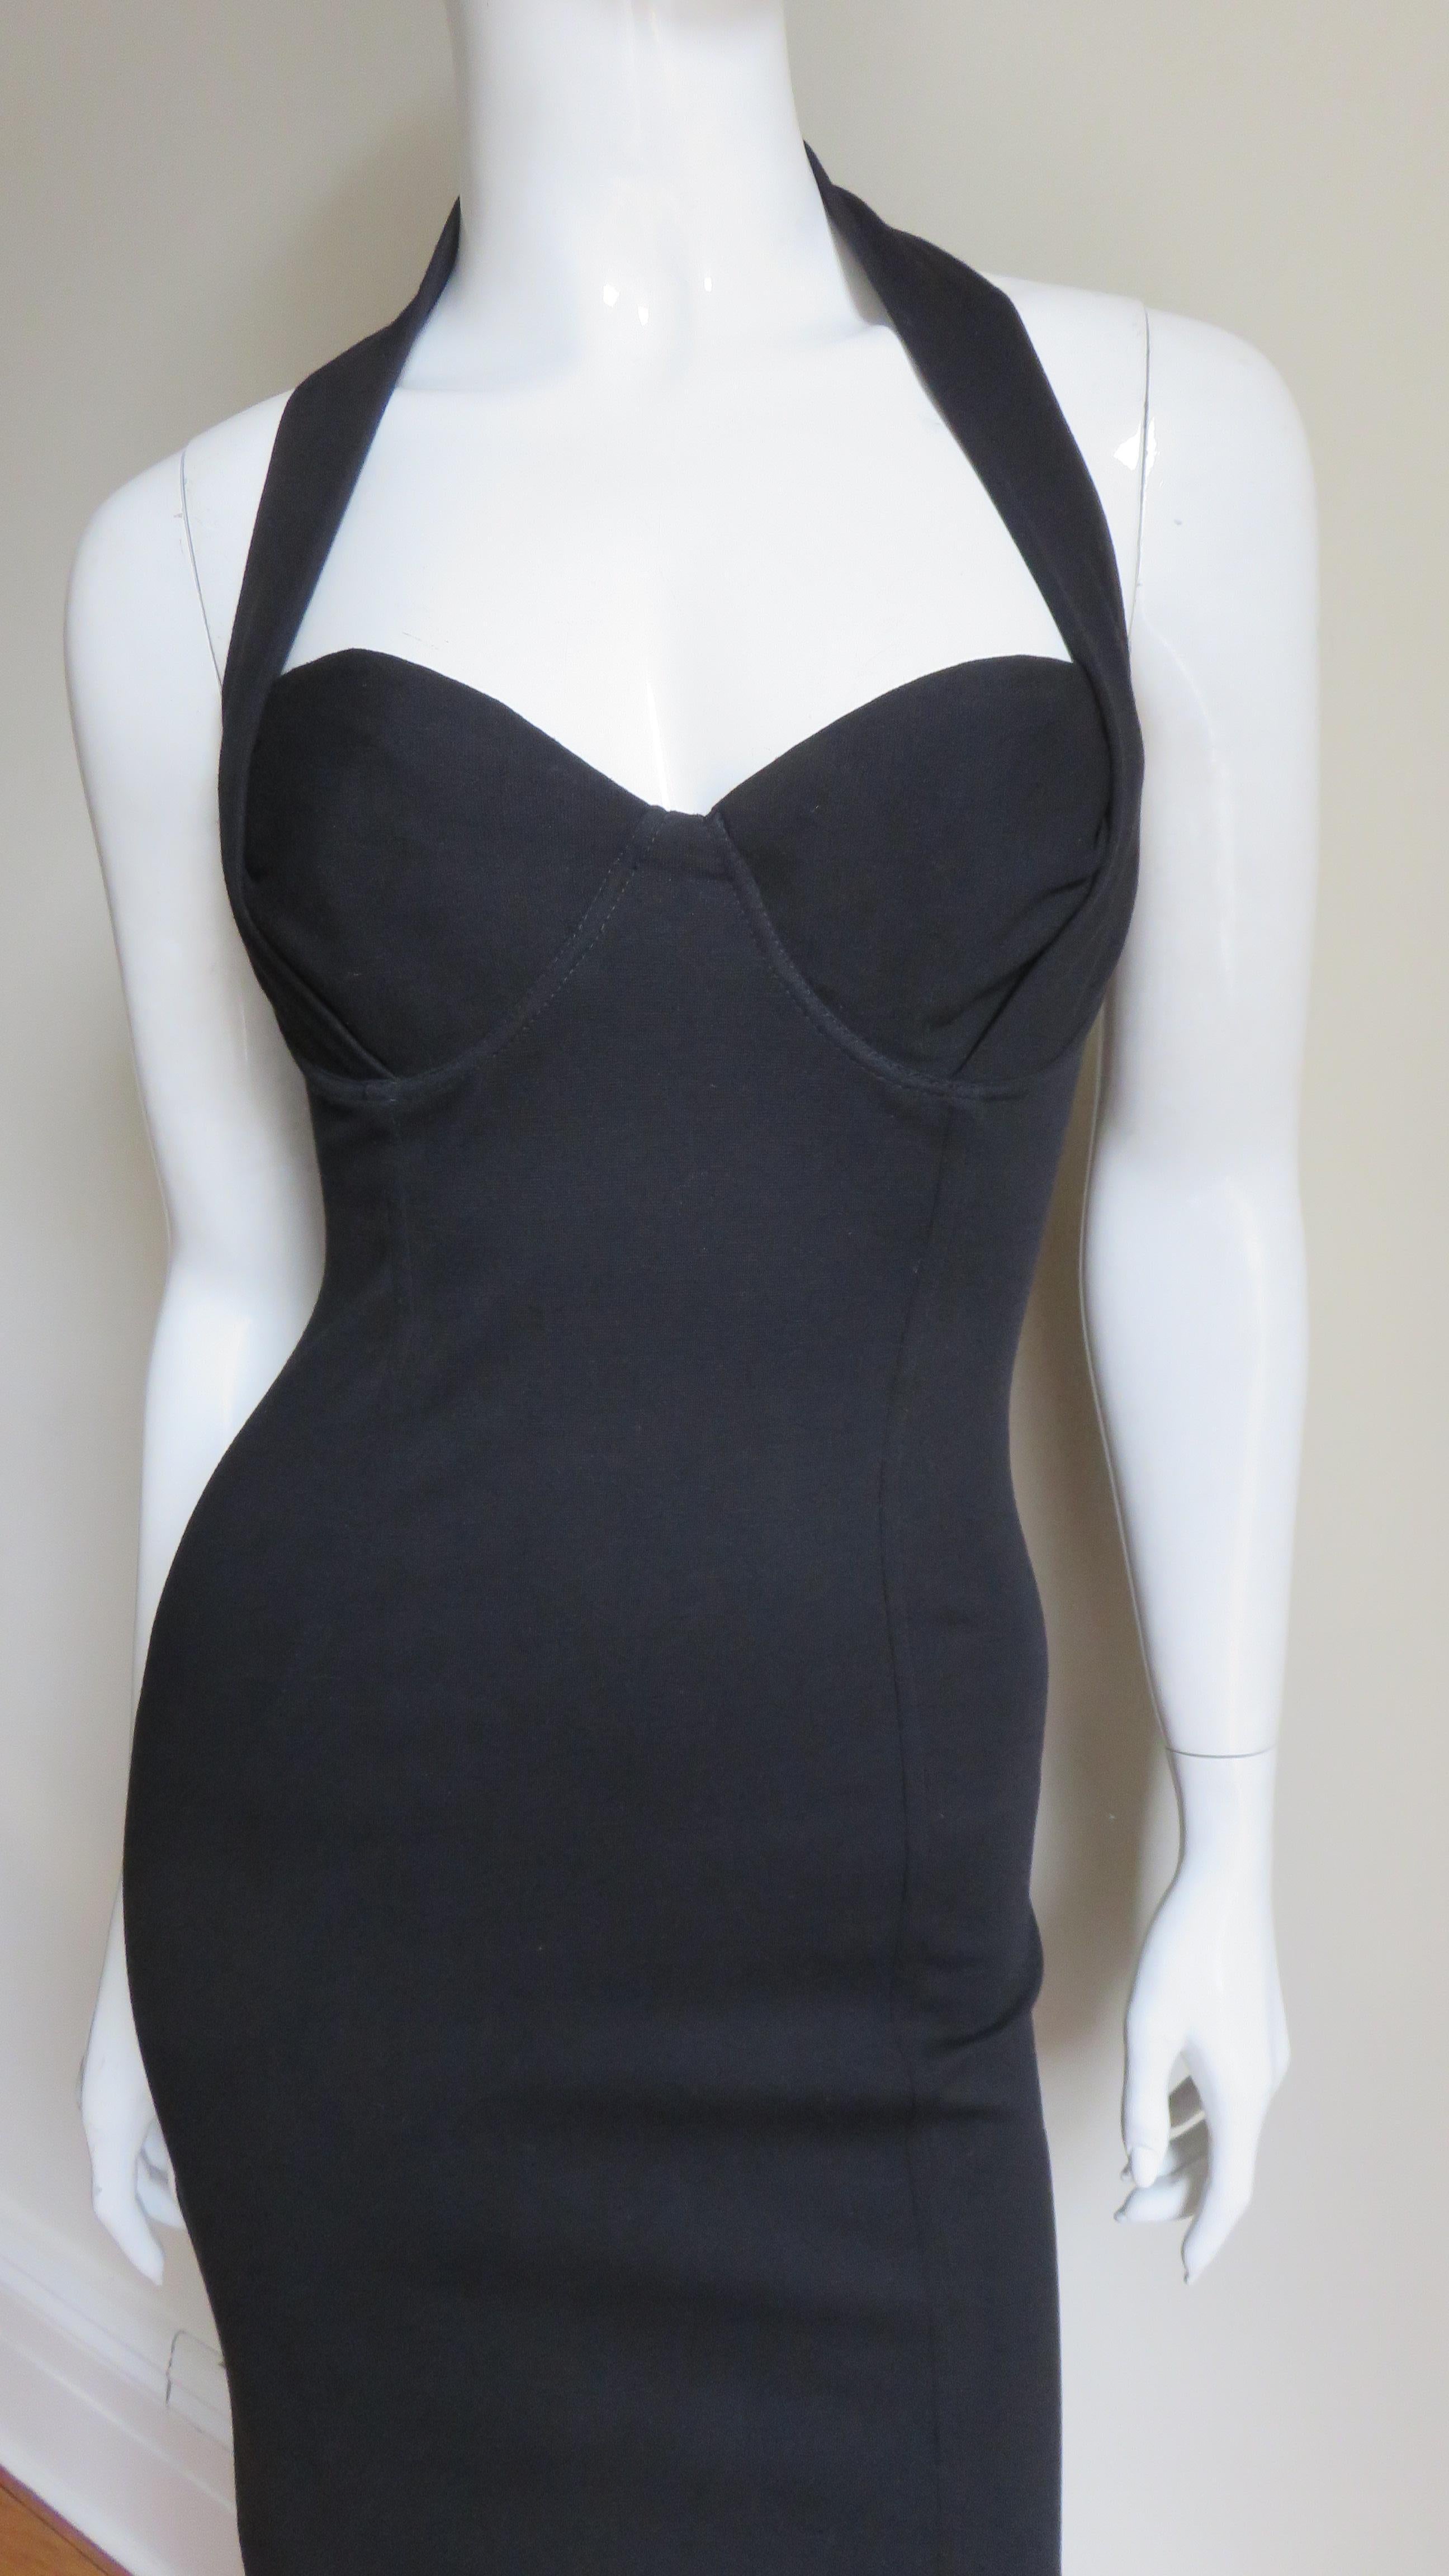 A great black cotton blend stretch halter dress by Jean Paul Gaultier.  It has sweetheart neckline and softly molded underwire bra cups with the halter strap extending over them.  The dress is fitted with lacing up the entire length of the back.  It